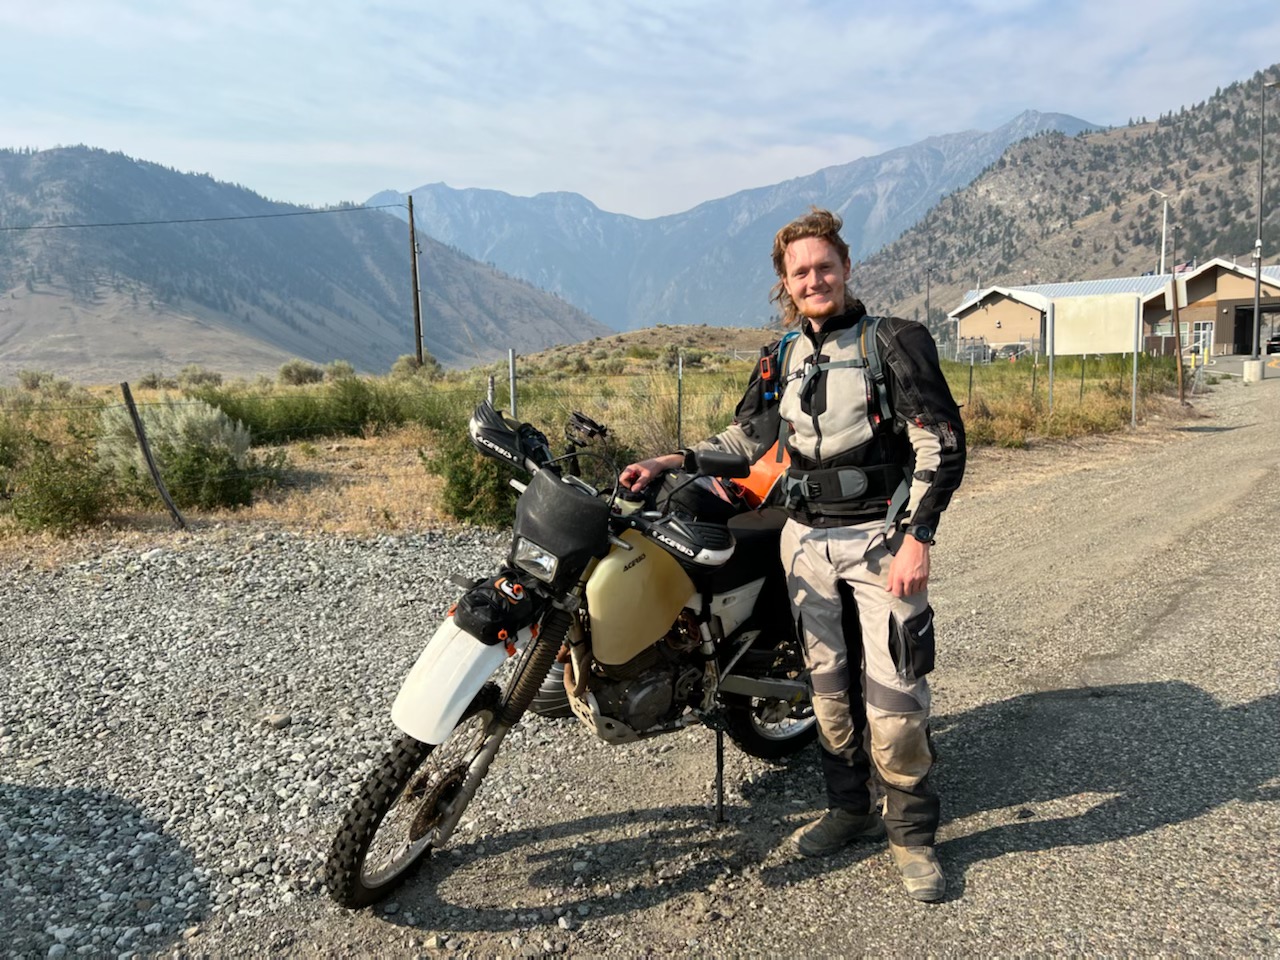 Posing at the Canadian border with my trusty steed, silently hoping and praying that the bike’s engine wouldn’t grenade itself halfway through the trip.